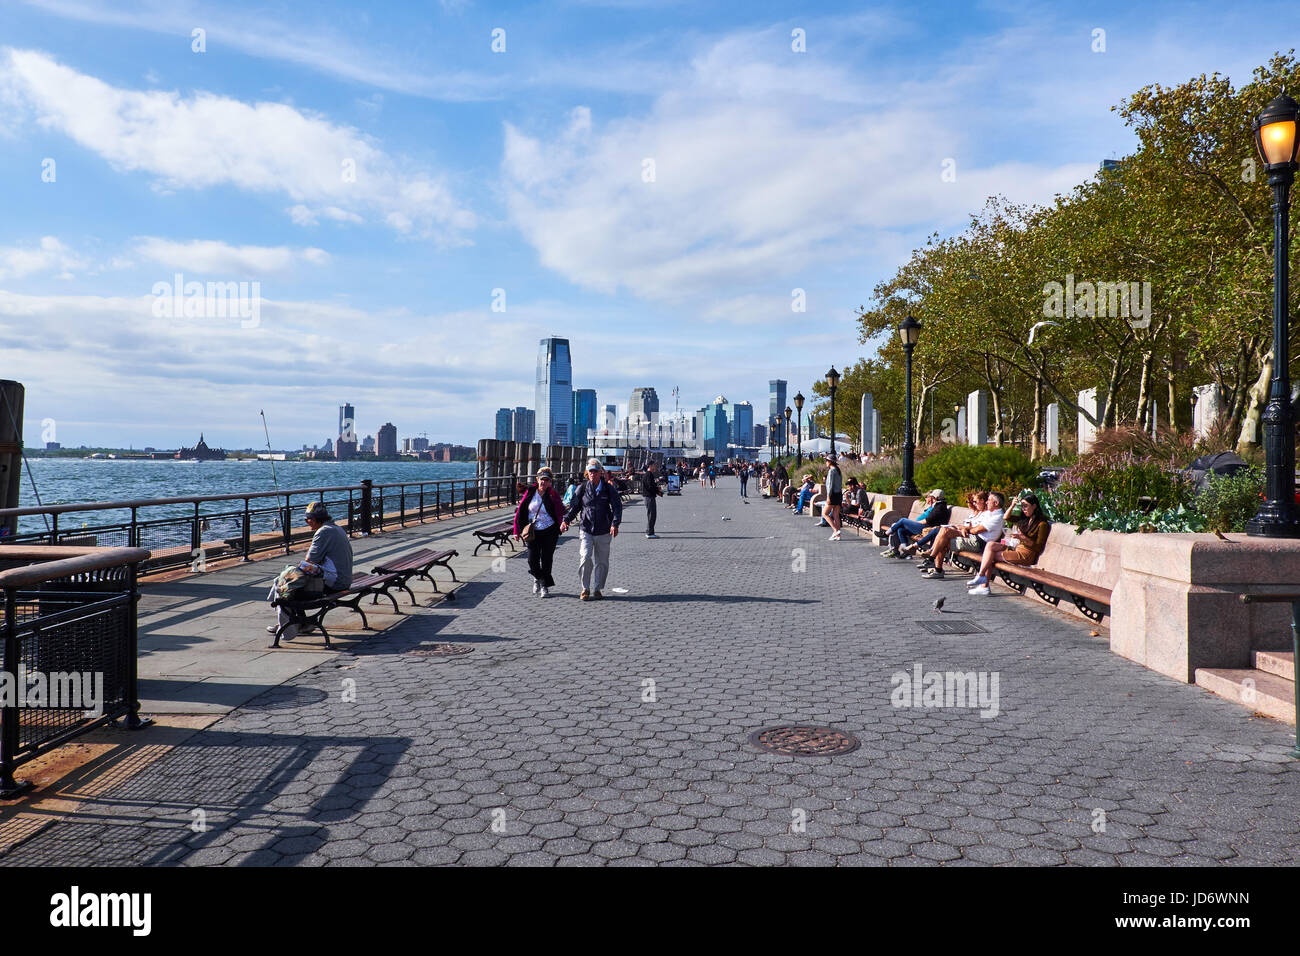 NEW YORK CITY - SEPTEMBER 26, 2016: People strolling and sitting on benches at Battery Park on the south tip of Manhattan Stock Photo